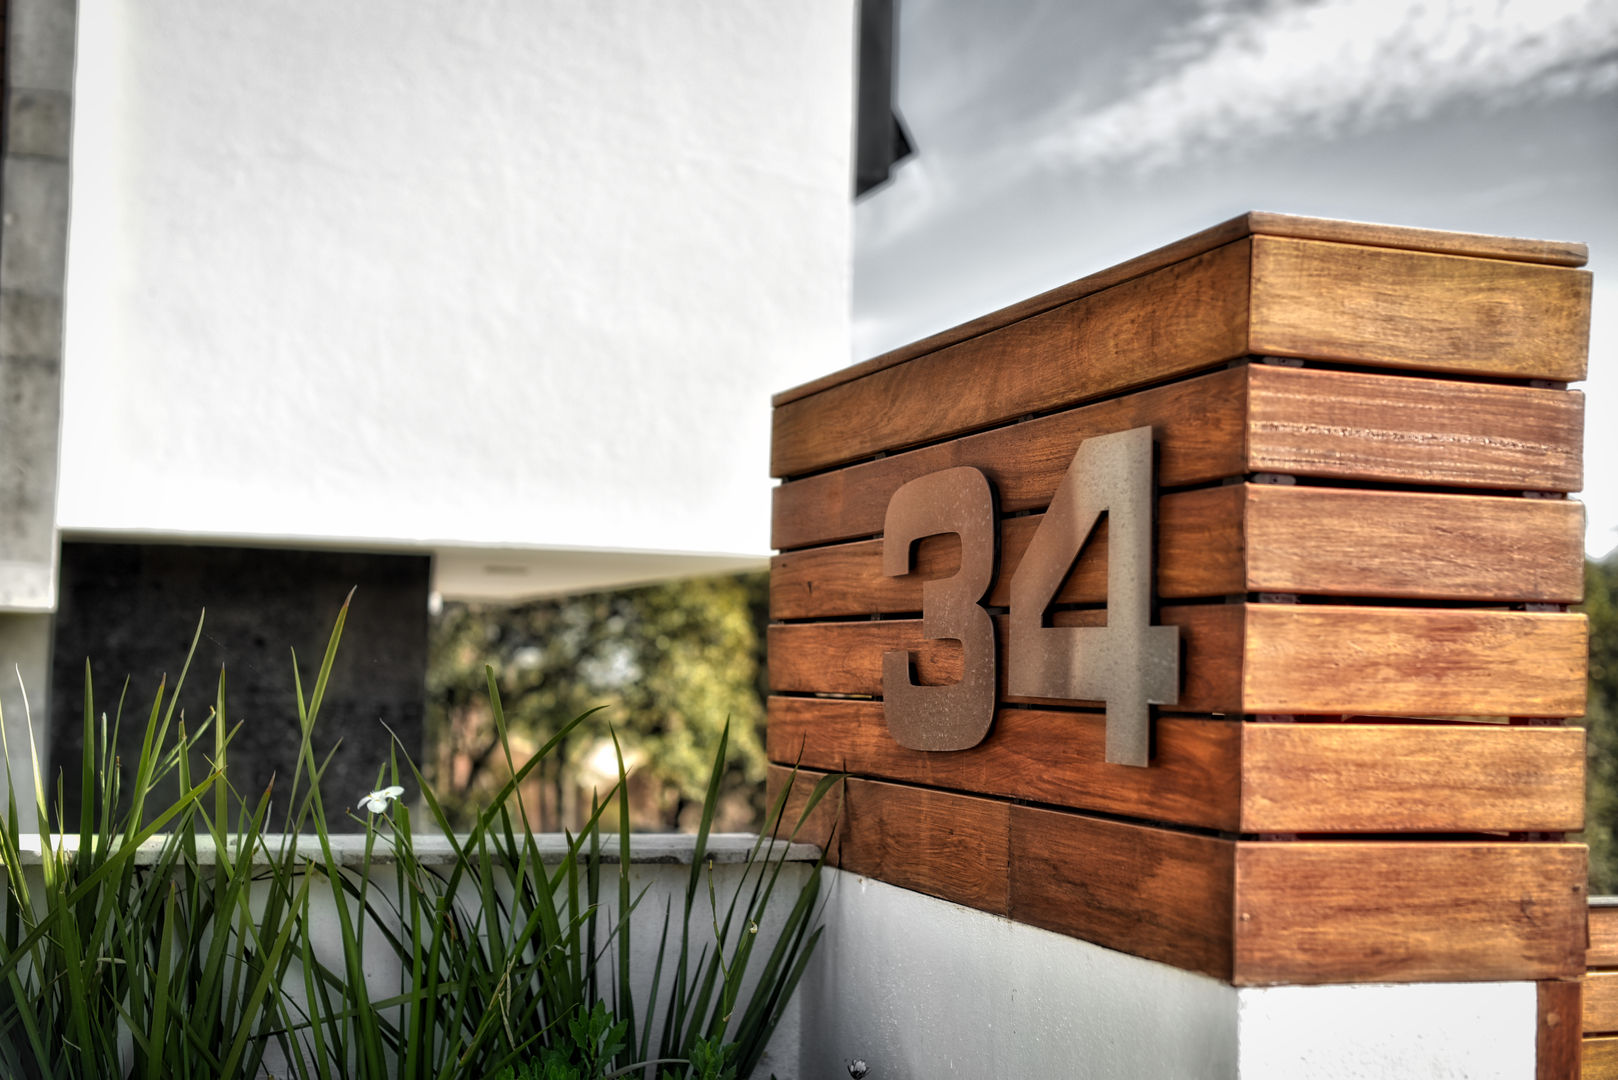 ACABADOS ARQCUBO, Arqcubo Arquitectos Arqcubo Arquitectos Patios Wood Wood effect Accessories & decoration